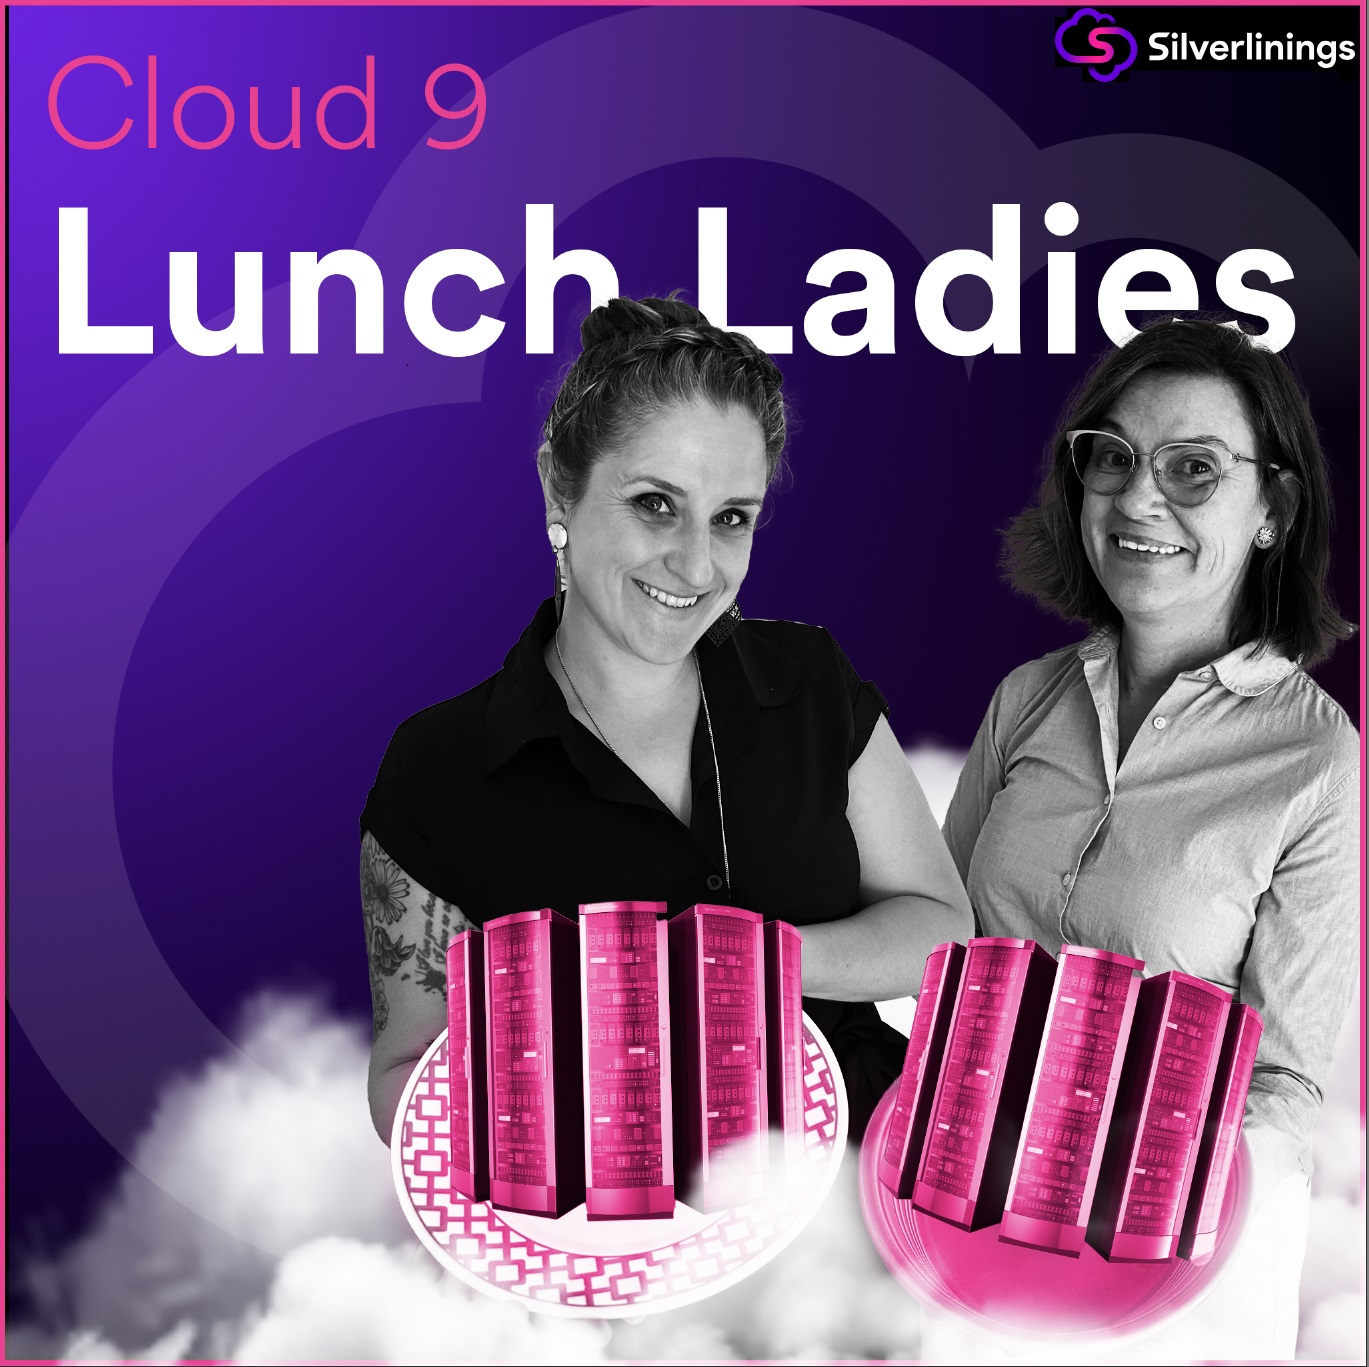 Cloud 9 Lunch Ladies News Wrap - Live from the Cloud Executive Summit